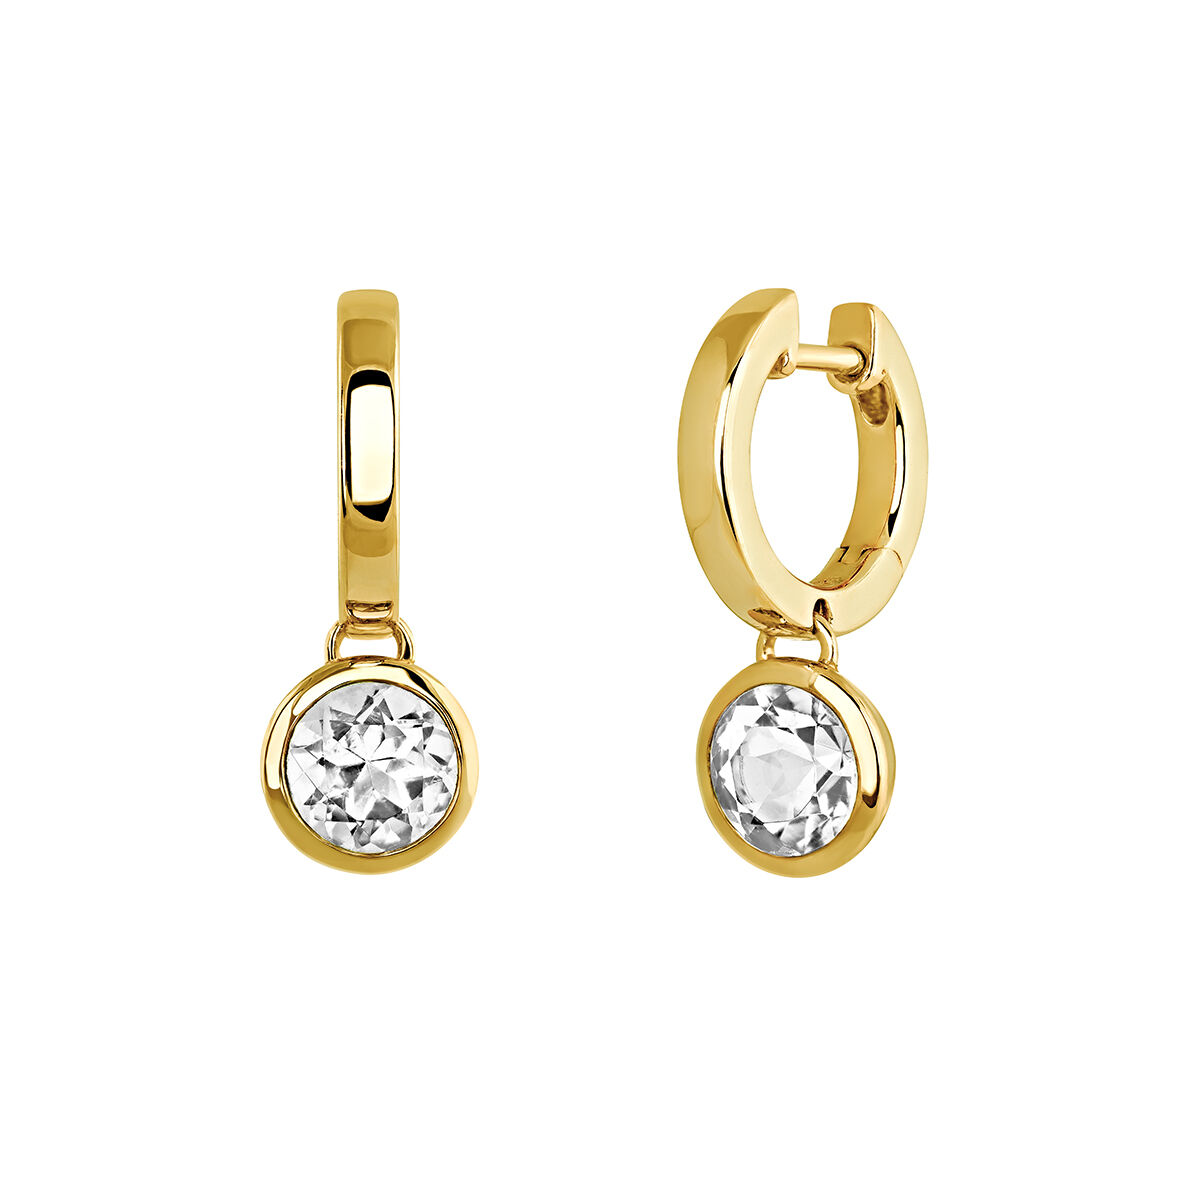 Gold plated hoop earrings with topaz , J03807-02-WT, hi-res